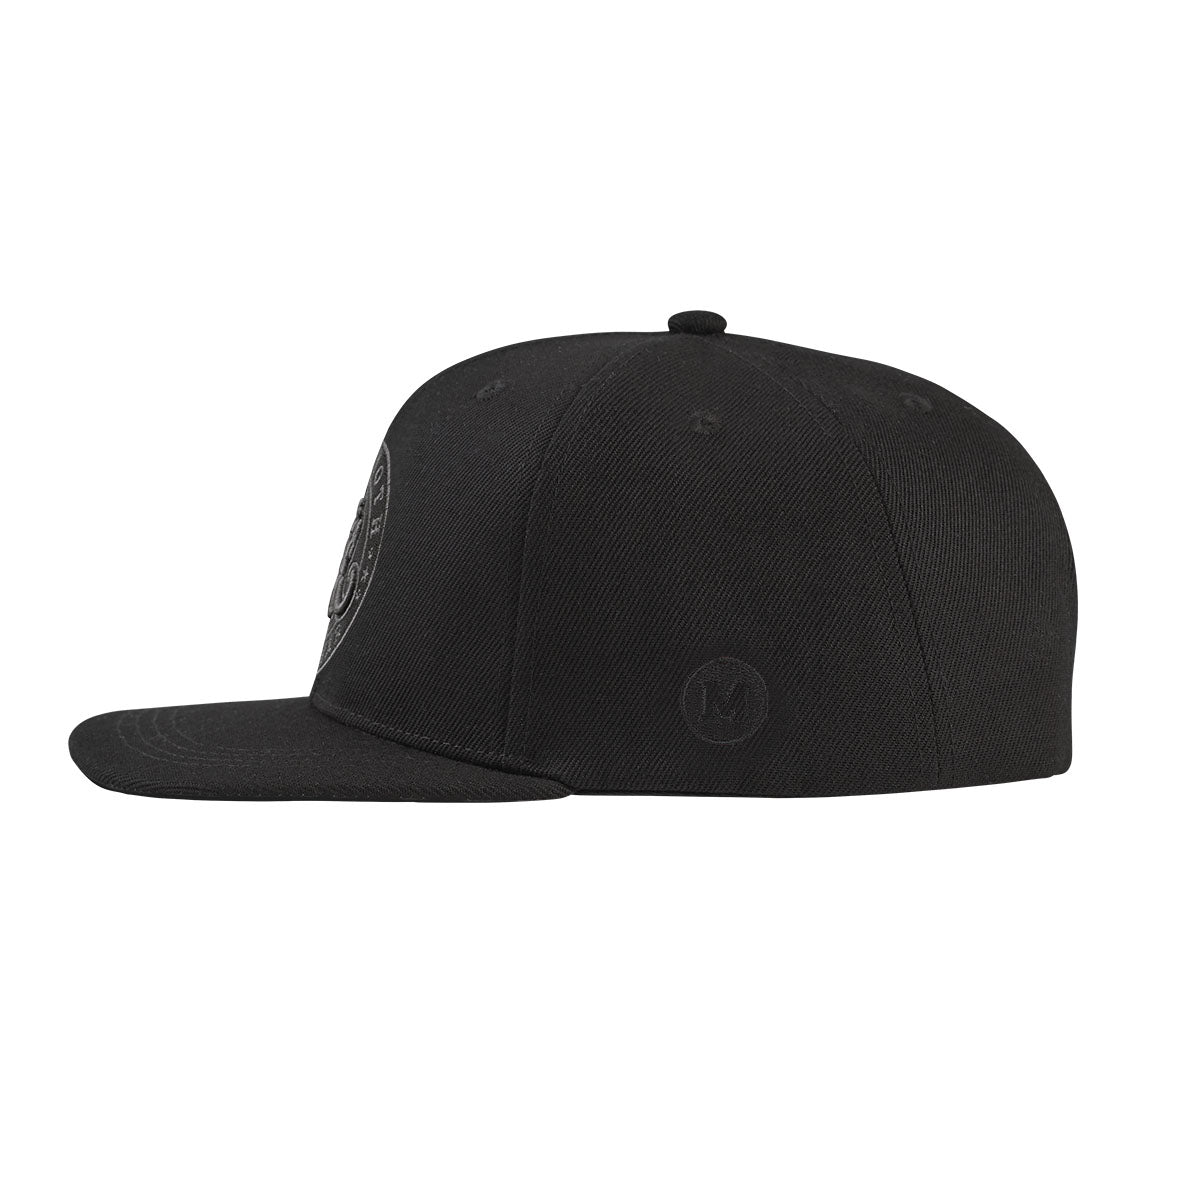 - Now Headwear Classic Hat Blacked Snapback Out - Order Mammoth